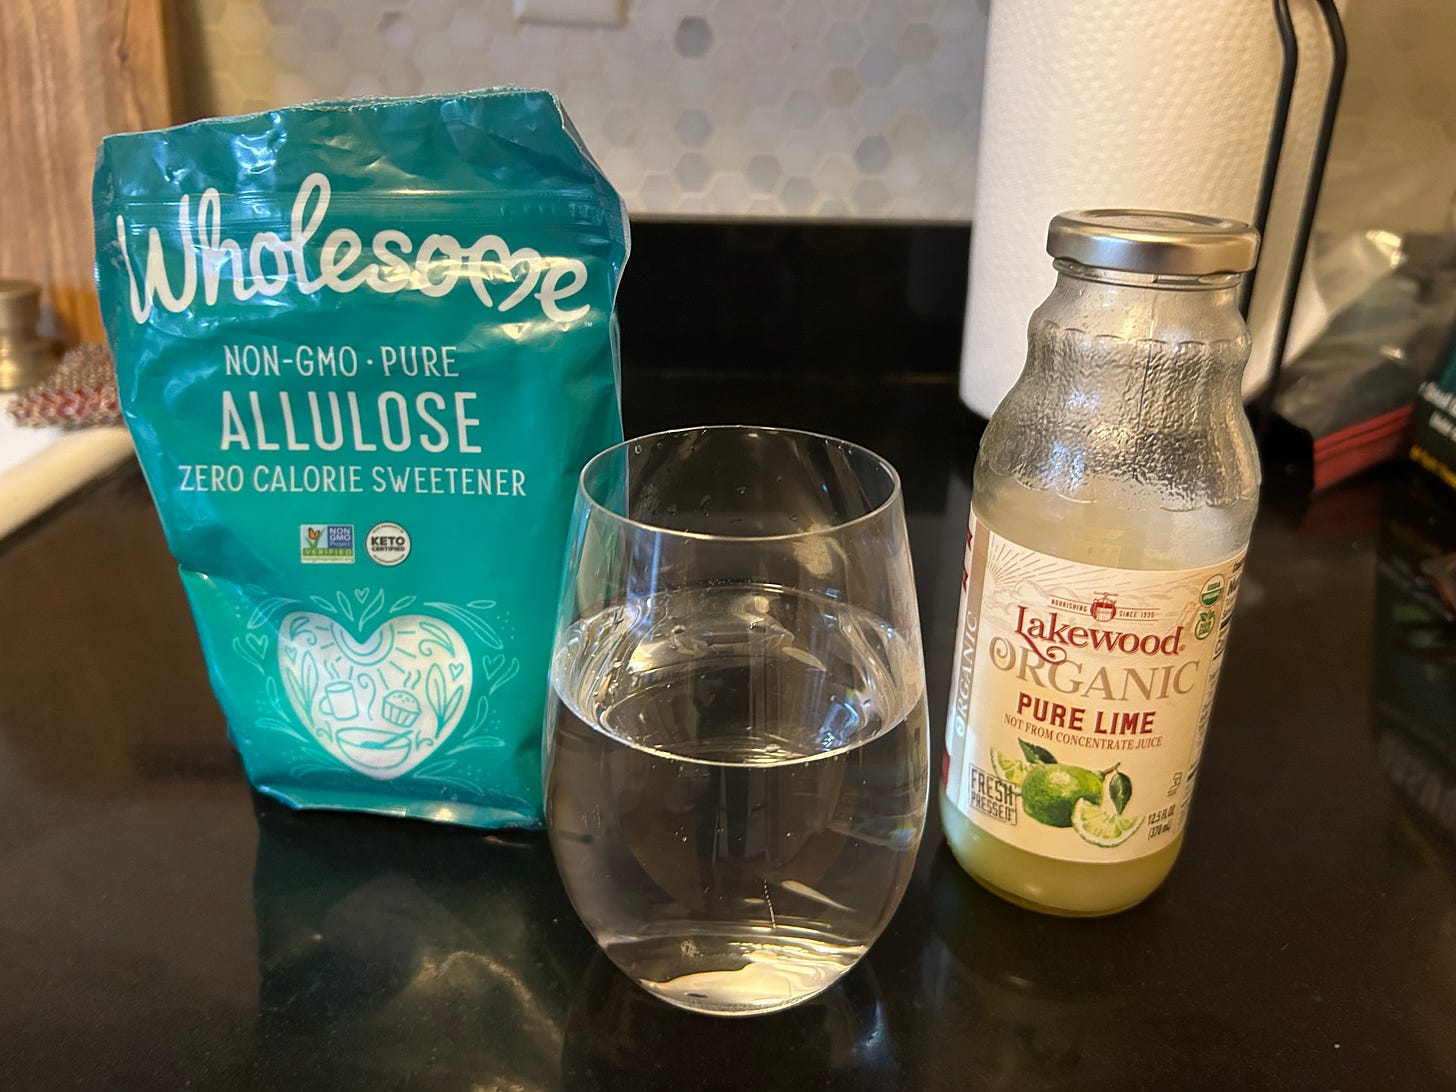 a bag of allulose, a glass of water, and a bottle of lime juice